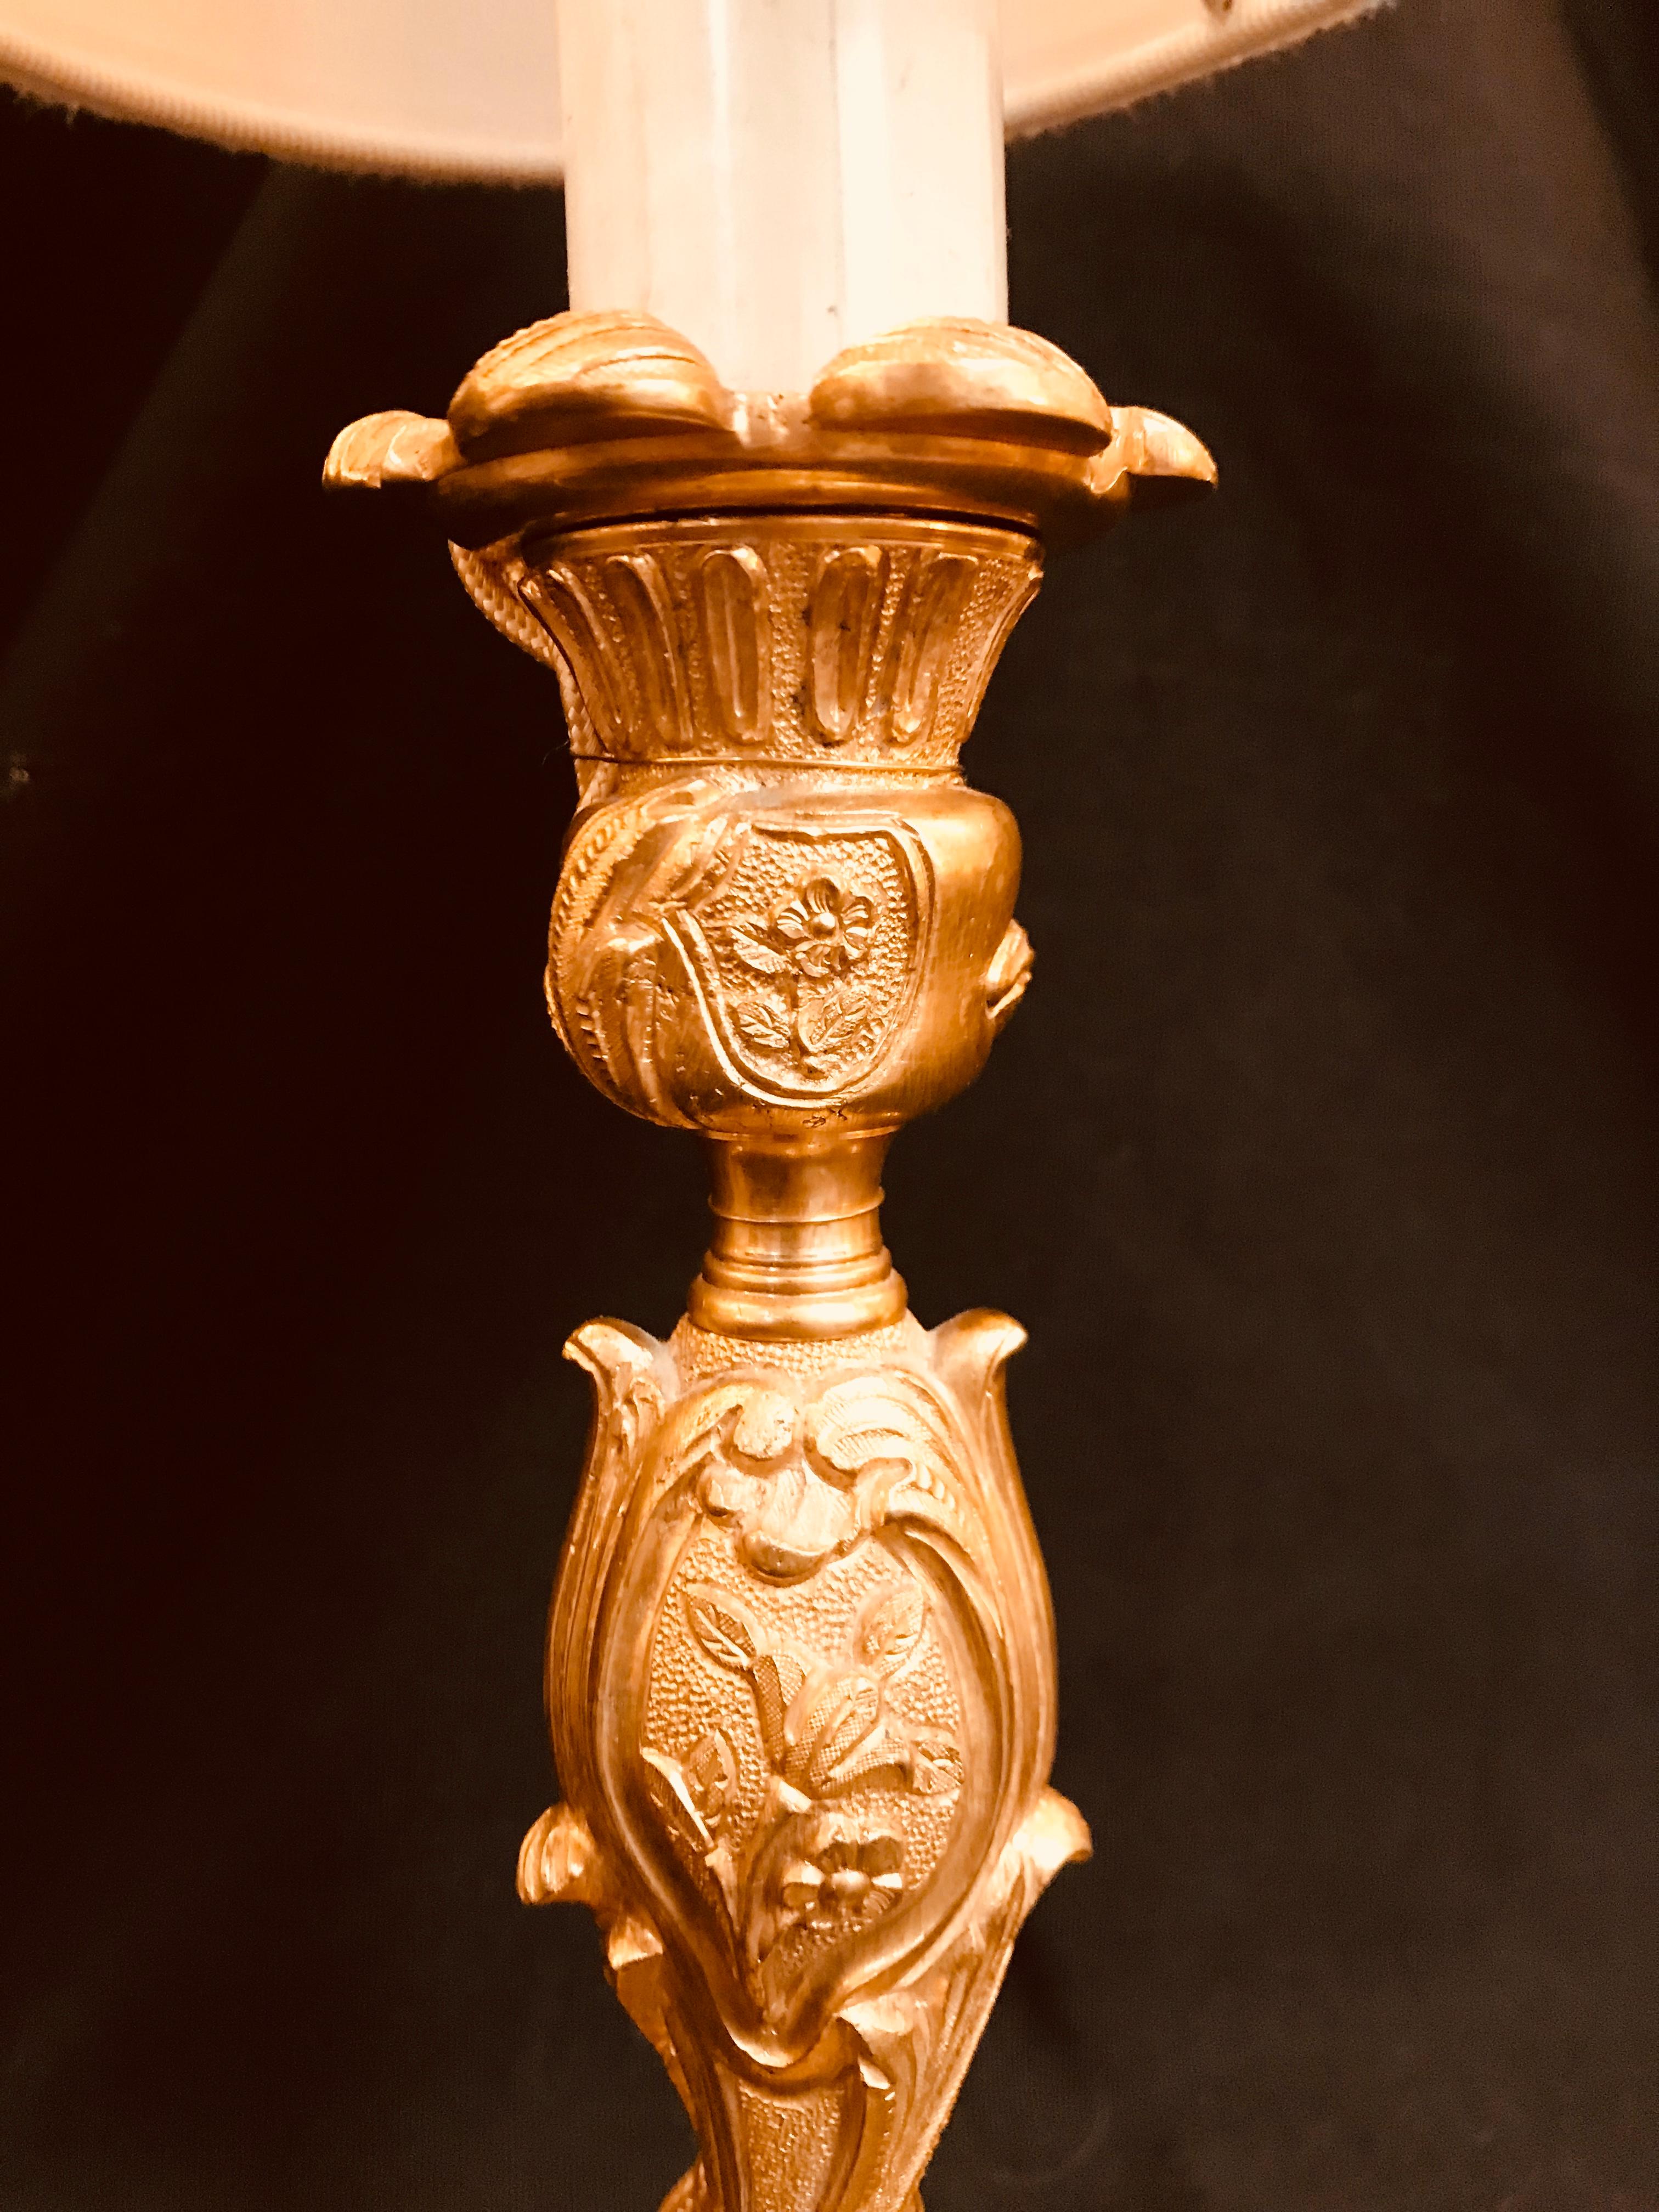 This little Louis XV style gilt bronze candlestick by Gherardo Degli Albizzi  would be ideal to be placed on a bedside table.
It resume the great taste of Rococo period decoration. As this, vegetal motifs are all-over this piece and it features